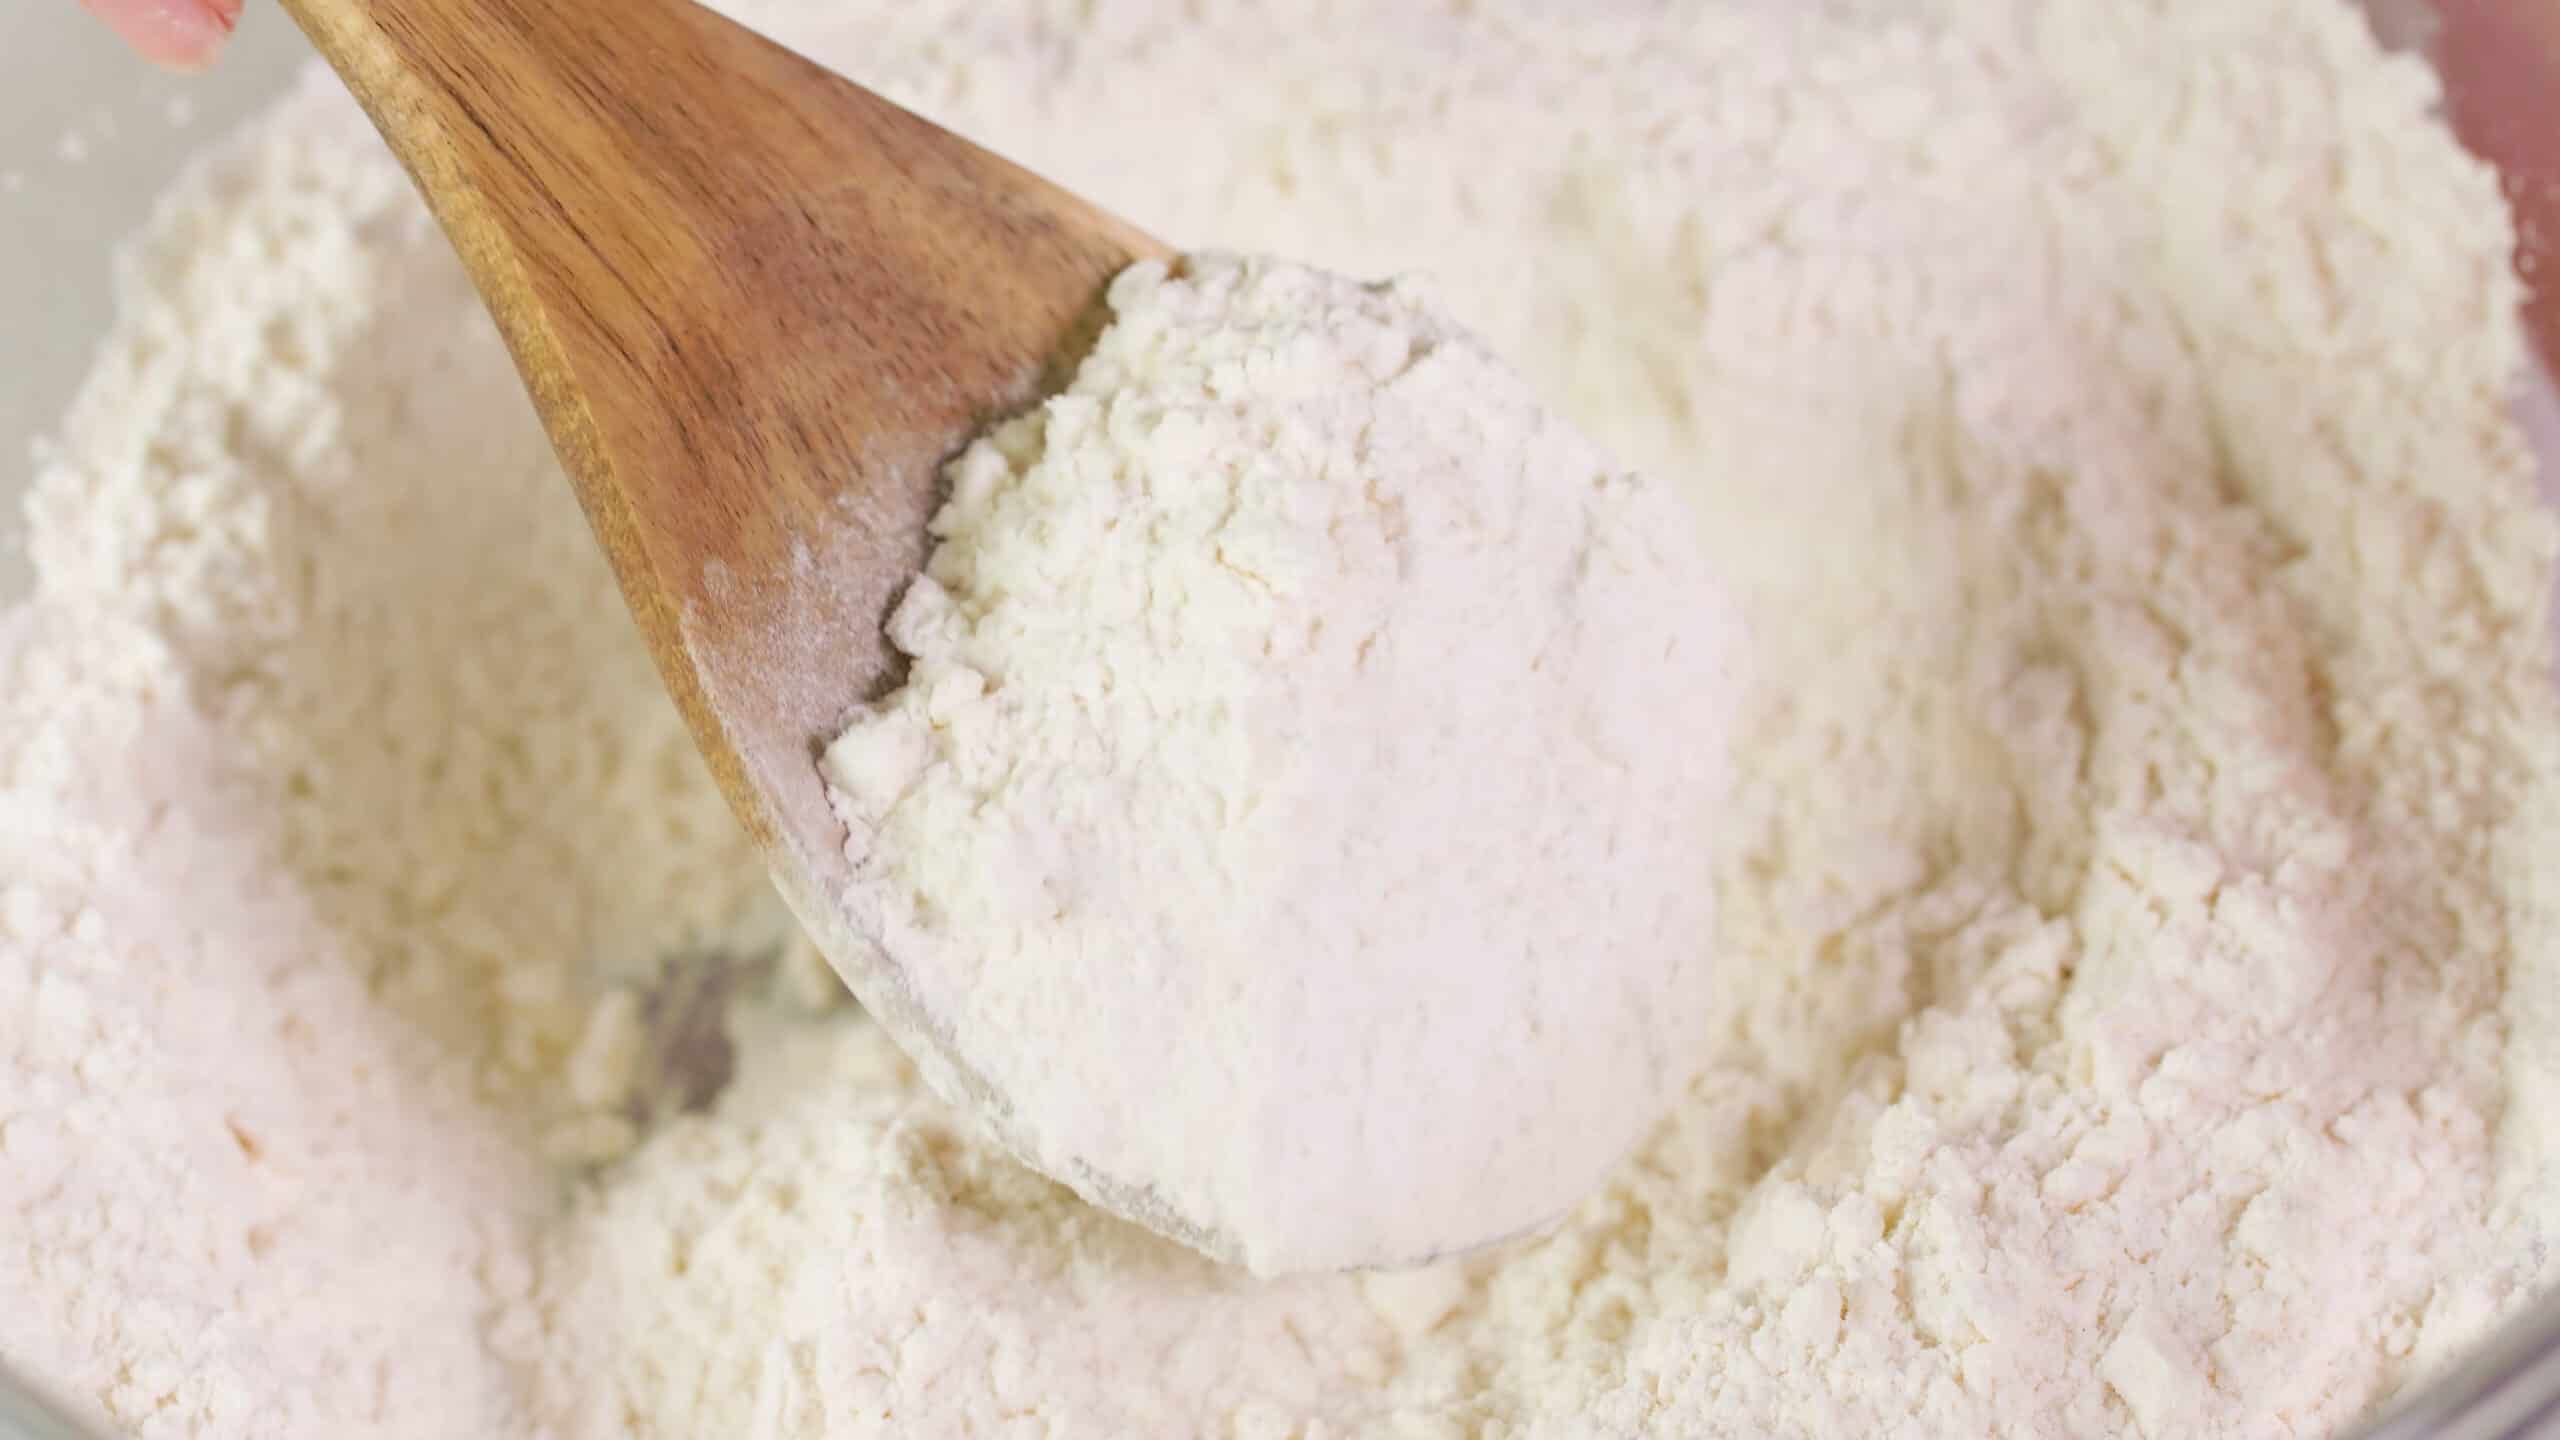 Close-up view of a wooden spoon with a portion of the mixed ingredients inside a mixing bowl to show the desired texture of the ingredients which is similar to damp sand.